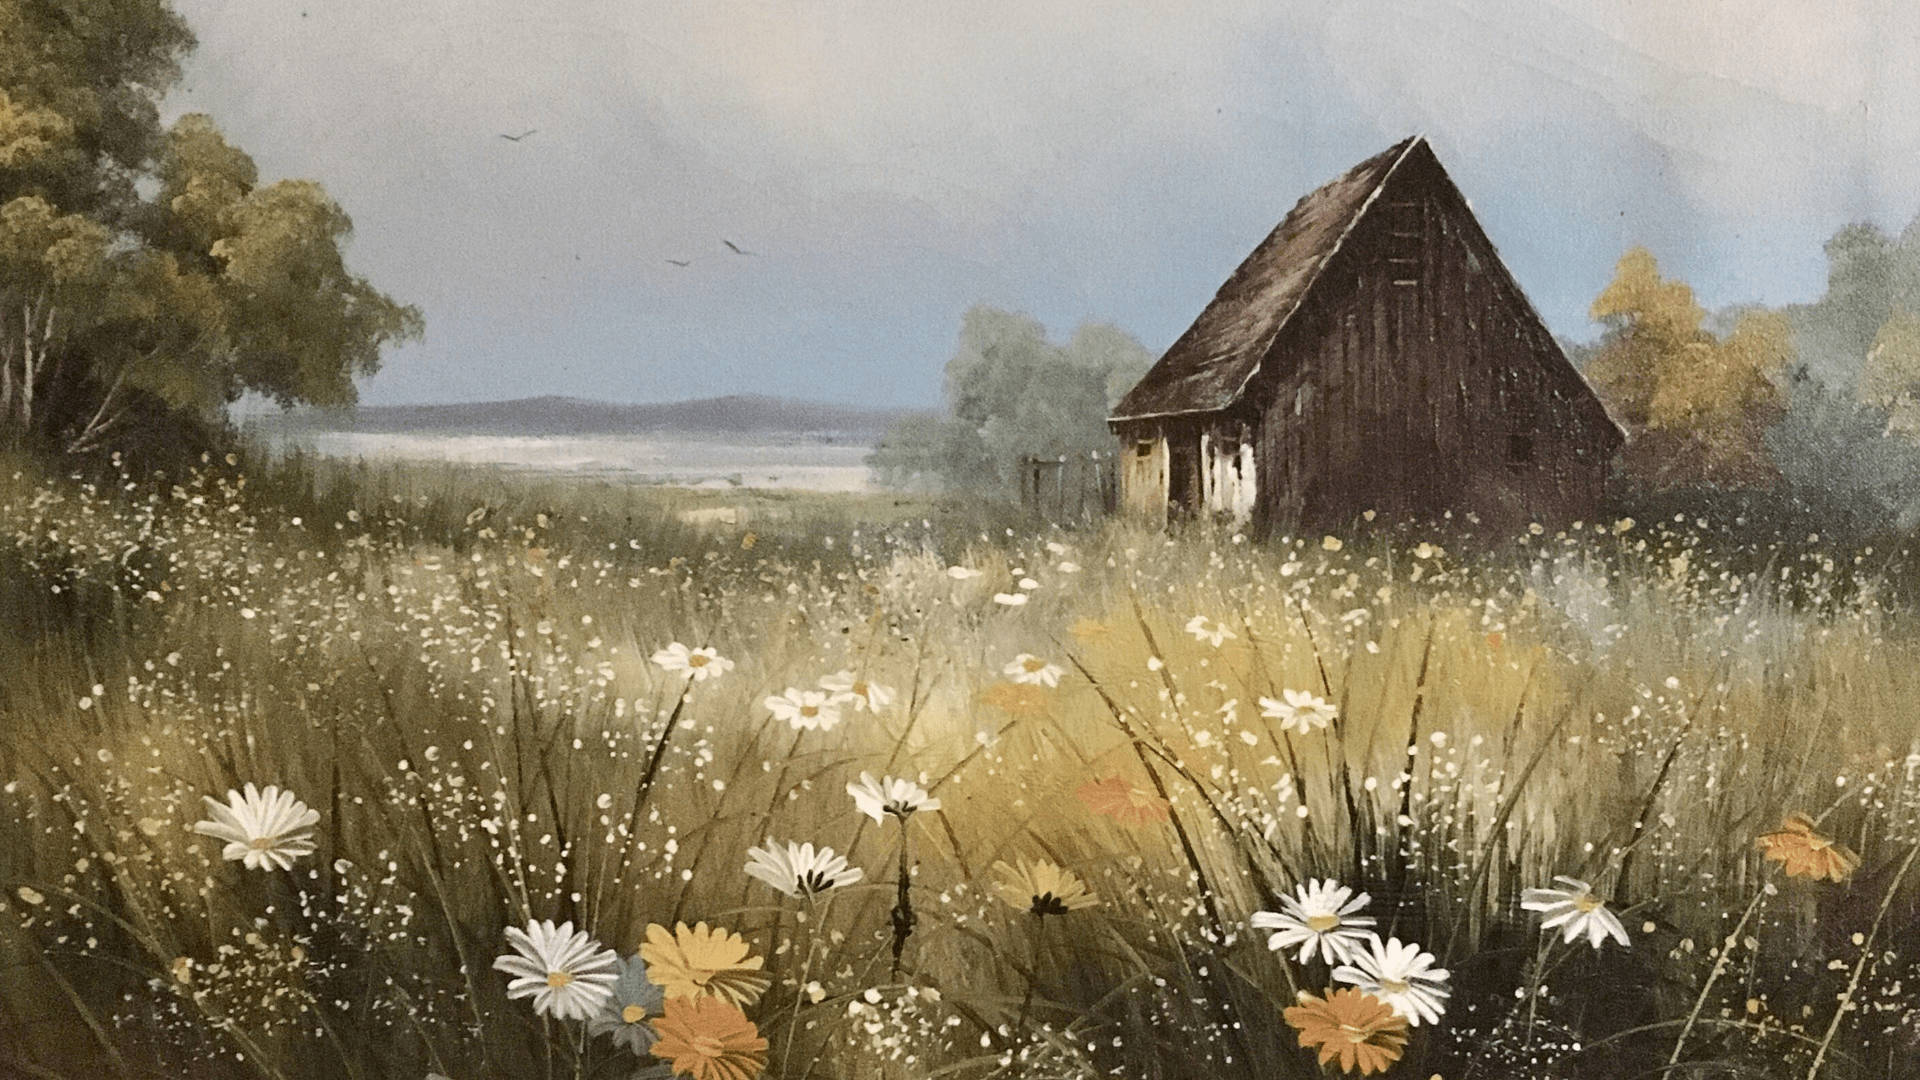 A painting of a barn in a field of flowers - Cottagecore, farm